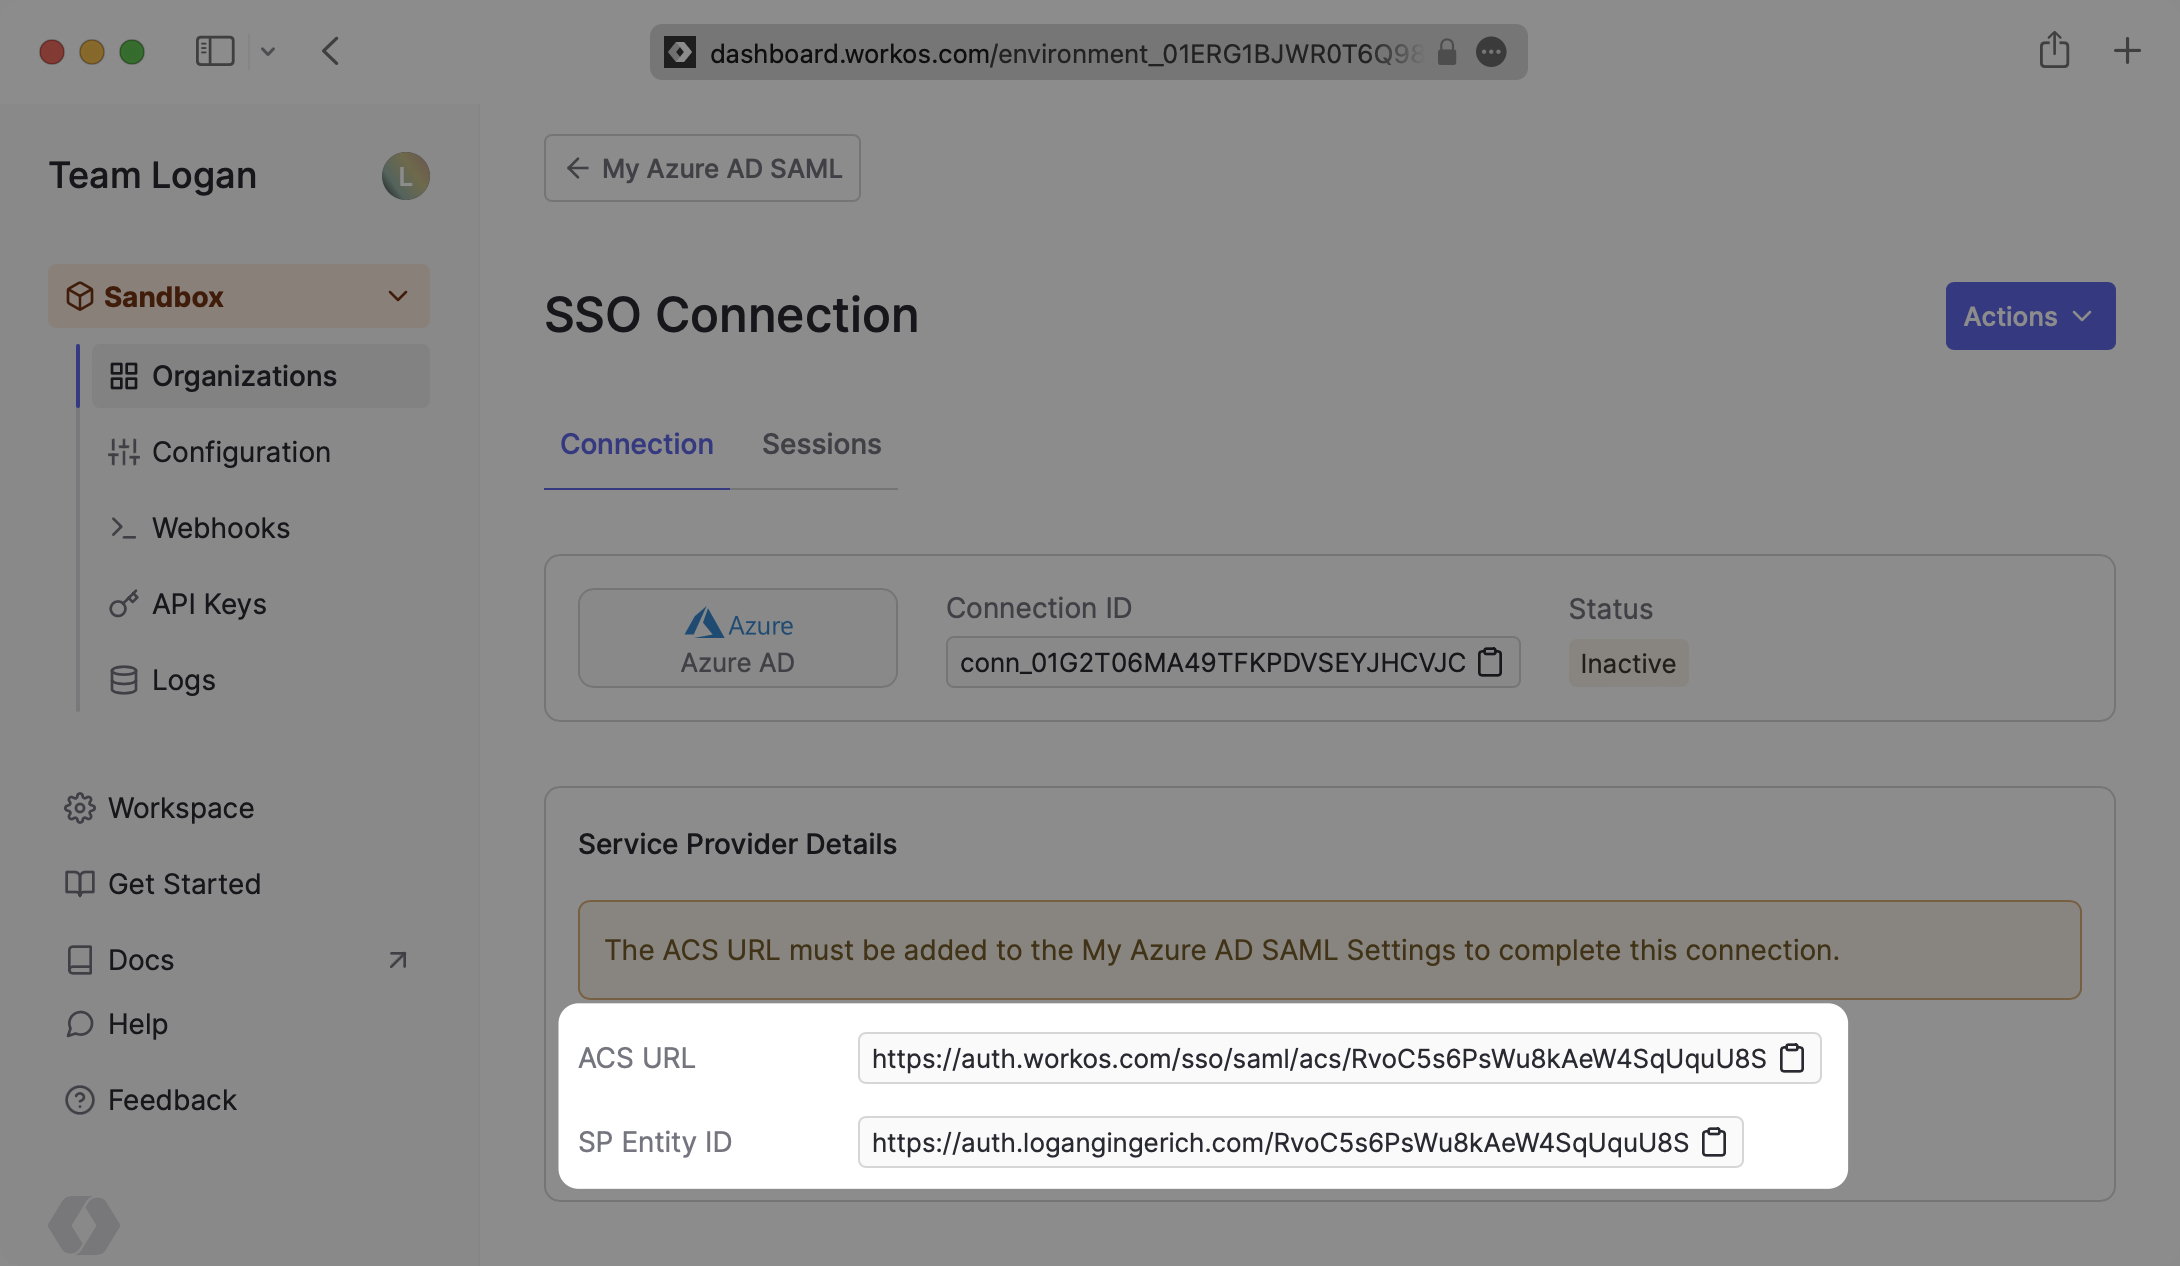 A screenshot showing the ACS URL and Entity ID in the WorkOS dashboard.